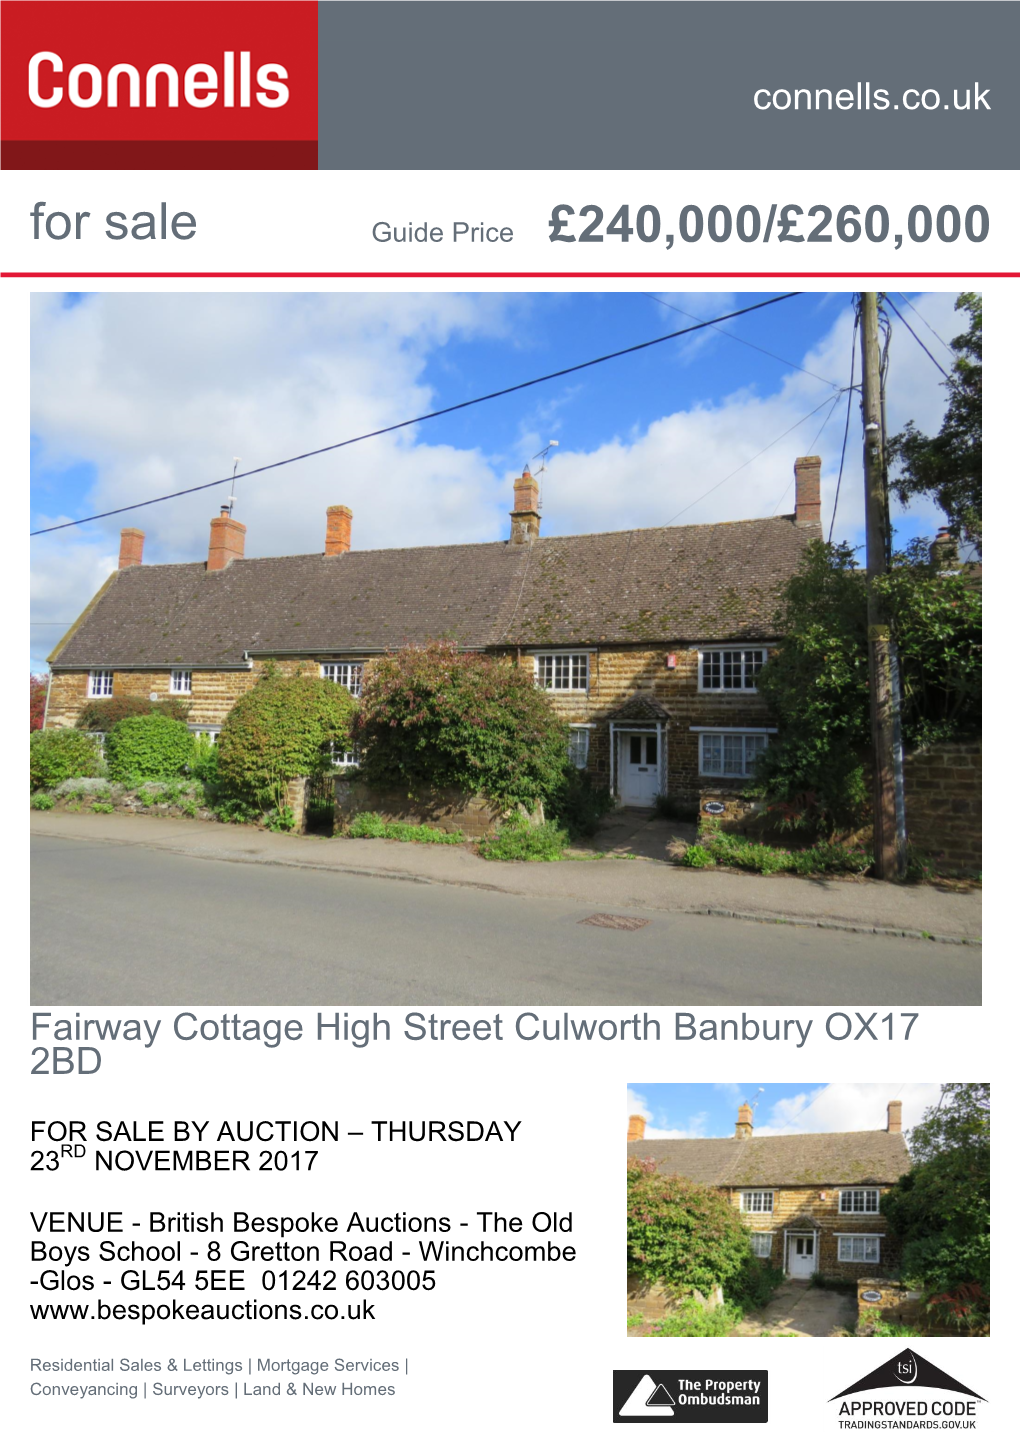 For Sale Guide Price £240,000/£260,000